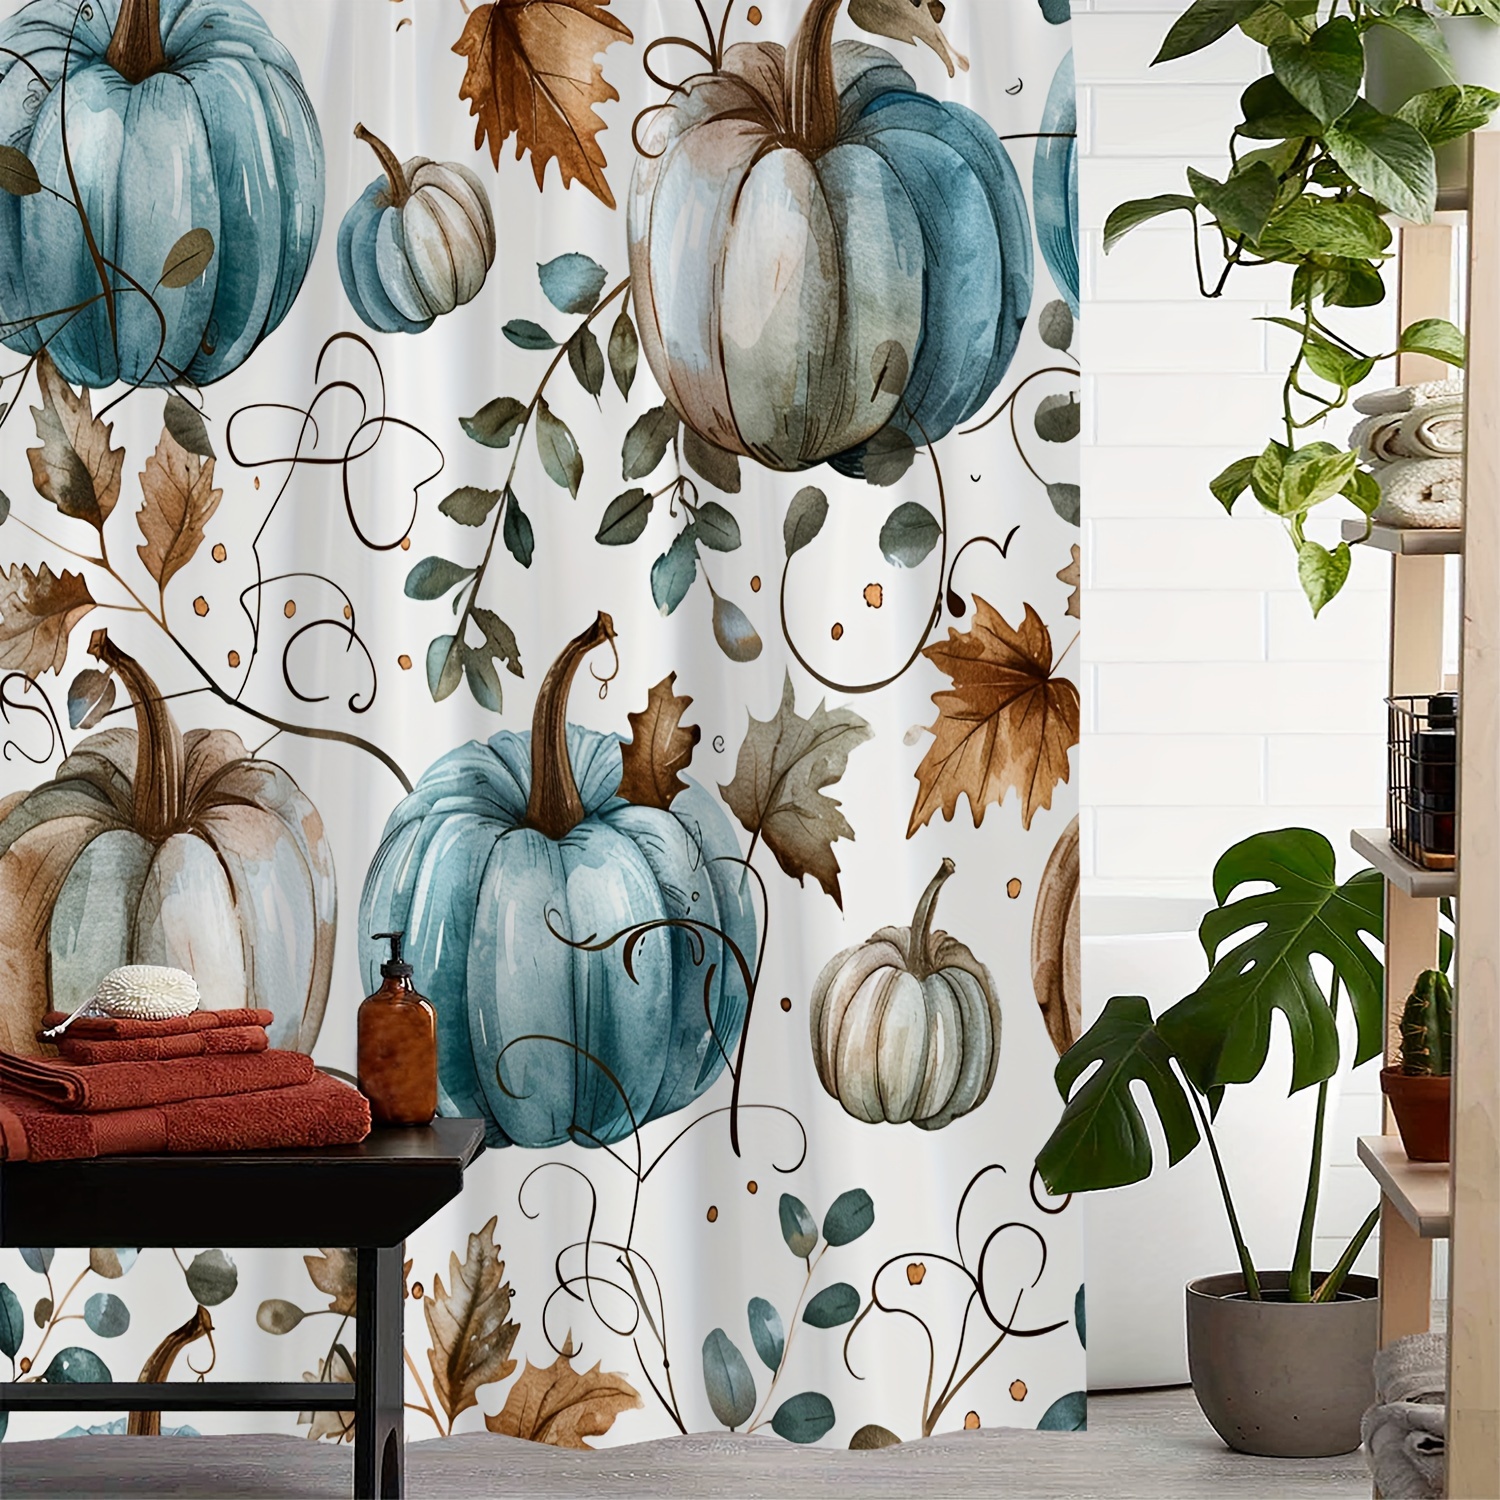 

Vintage Maple Leaf Pumpkin Print Waterproof Shower Curtain With 12 Hooks, Machine Washable, Water-resistant Polyester, Woven Arts-themed Curtain For Bathroom And Windows